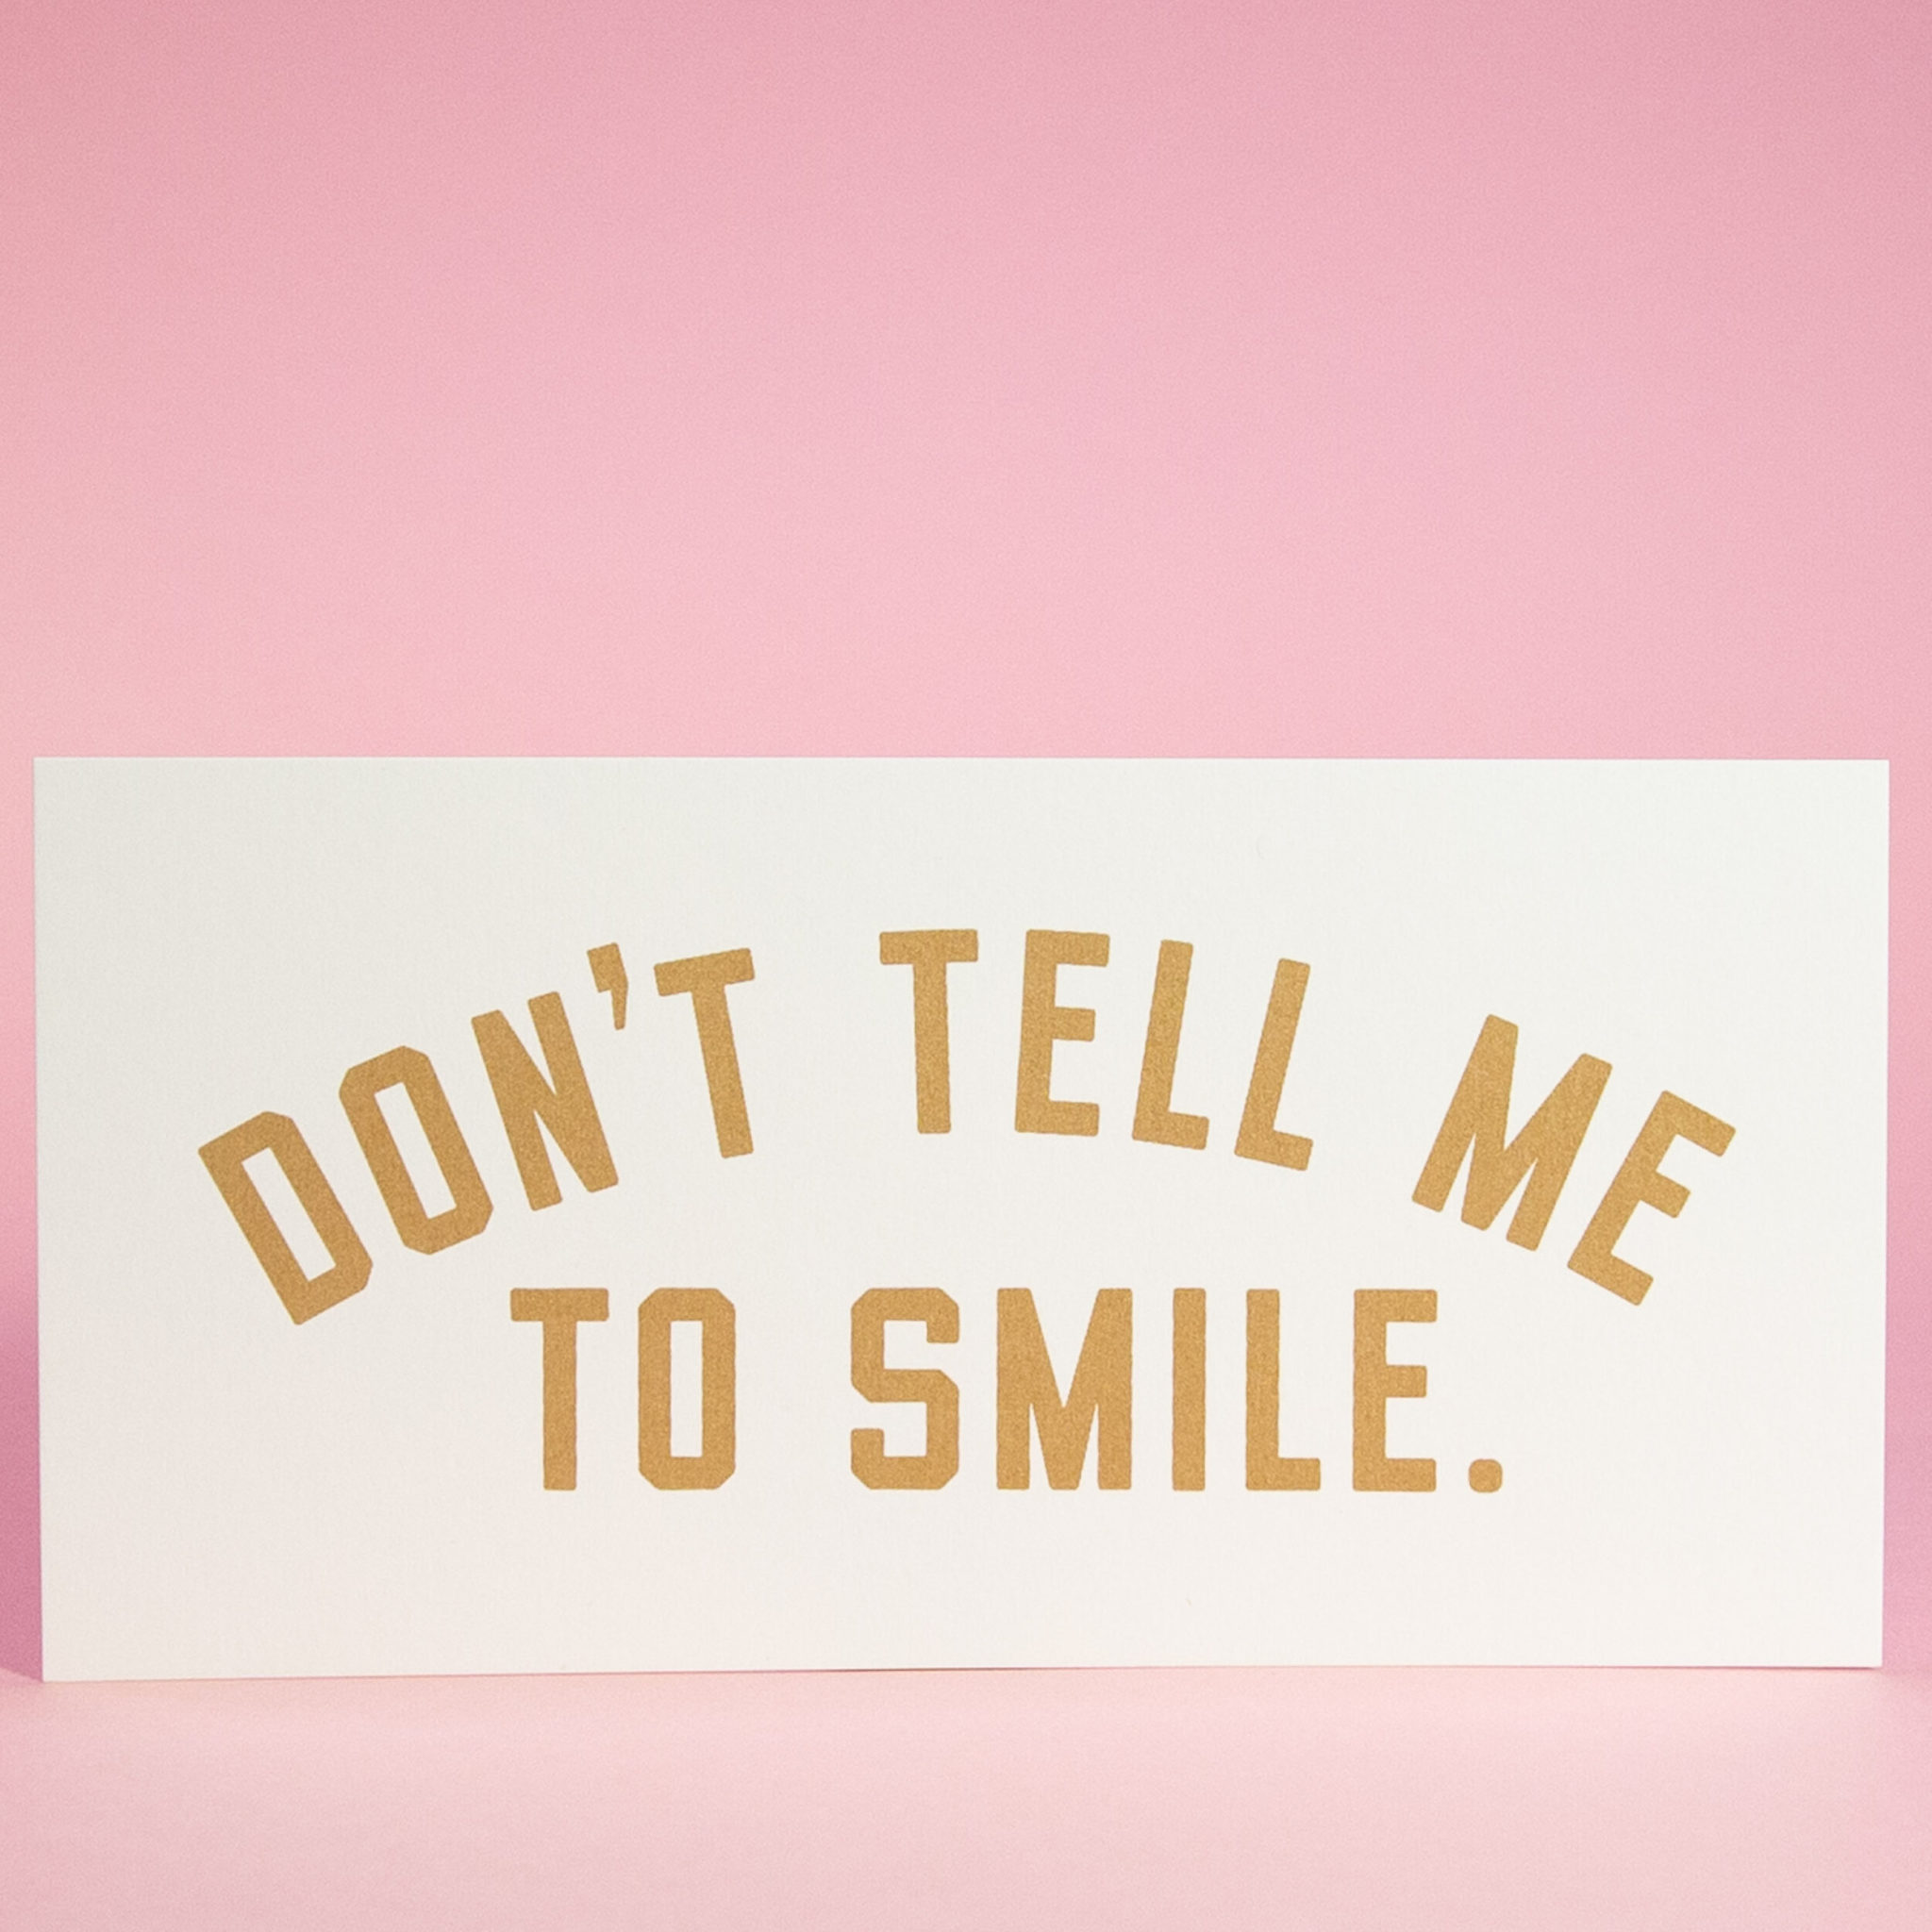 A sign that says "Don't Tell Me to Smile."